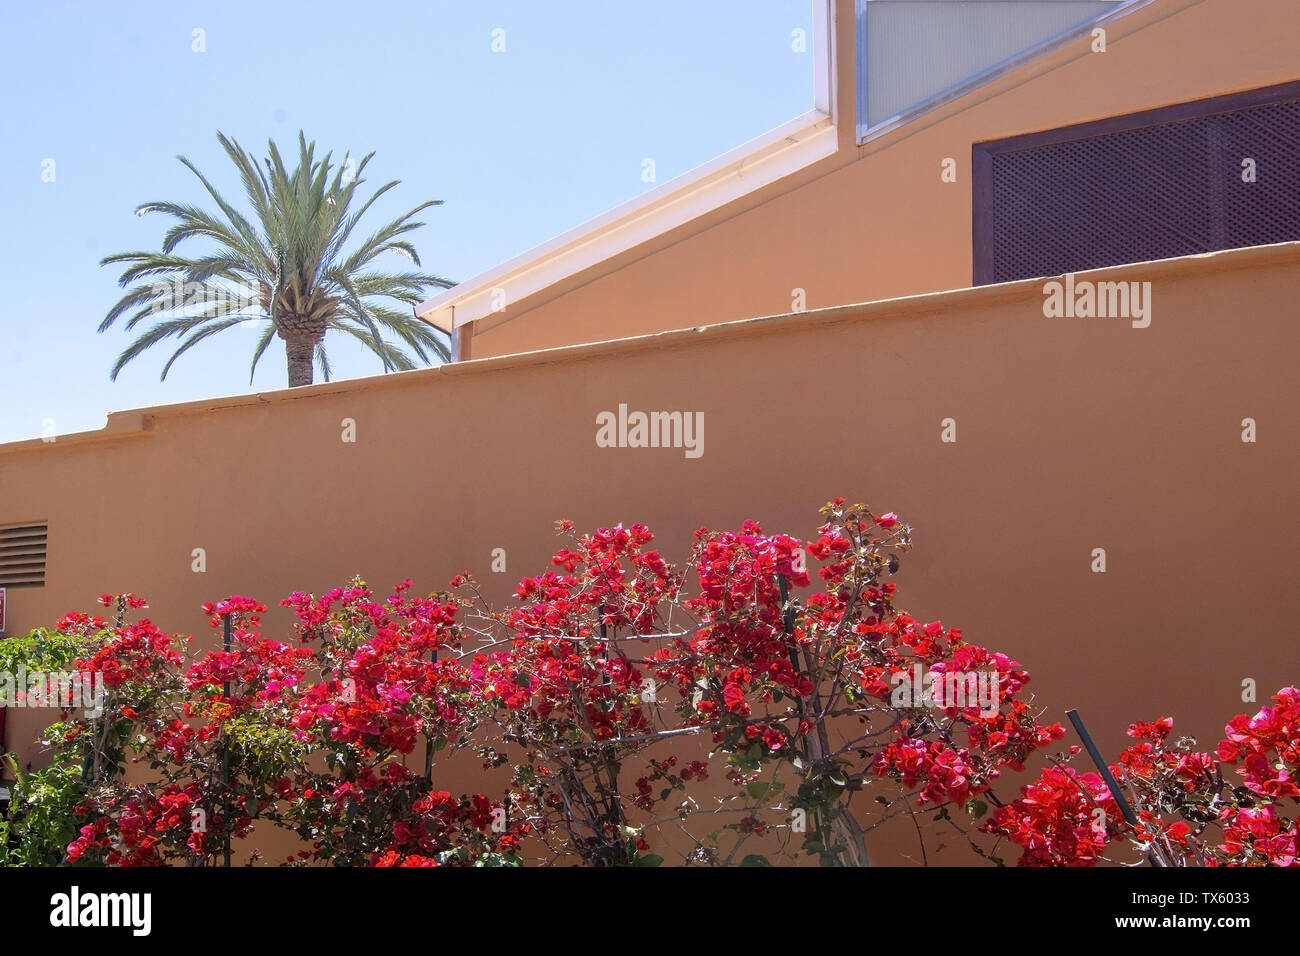 Red bougainvillea flowers against terracotta brown wall on a sunny day in Mallorca, Spain Stock Photo